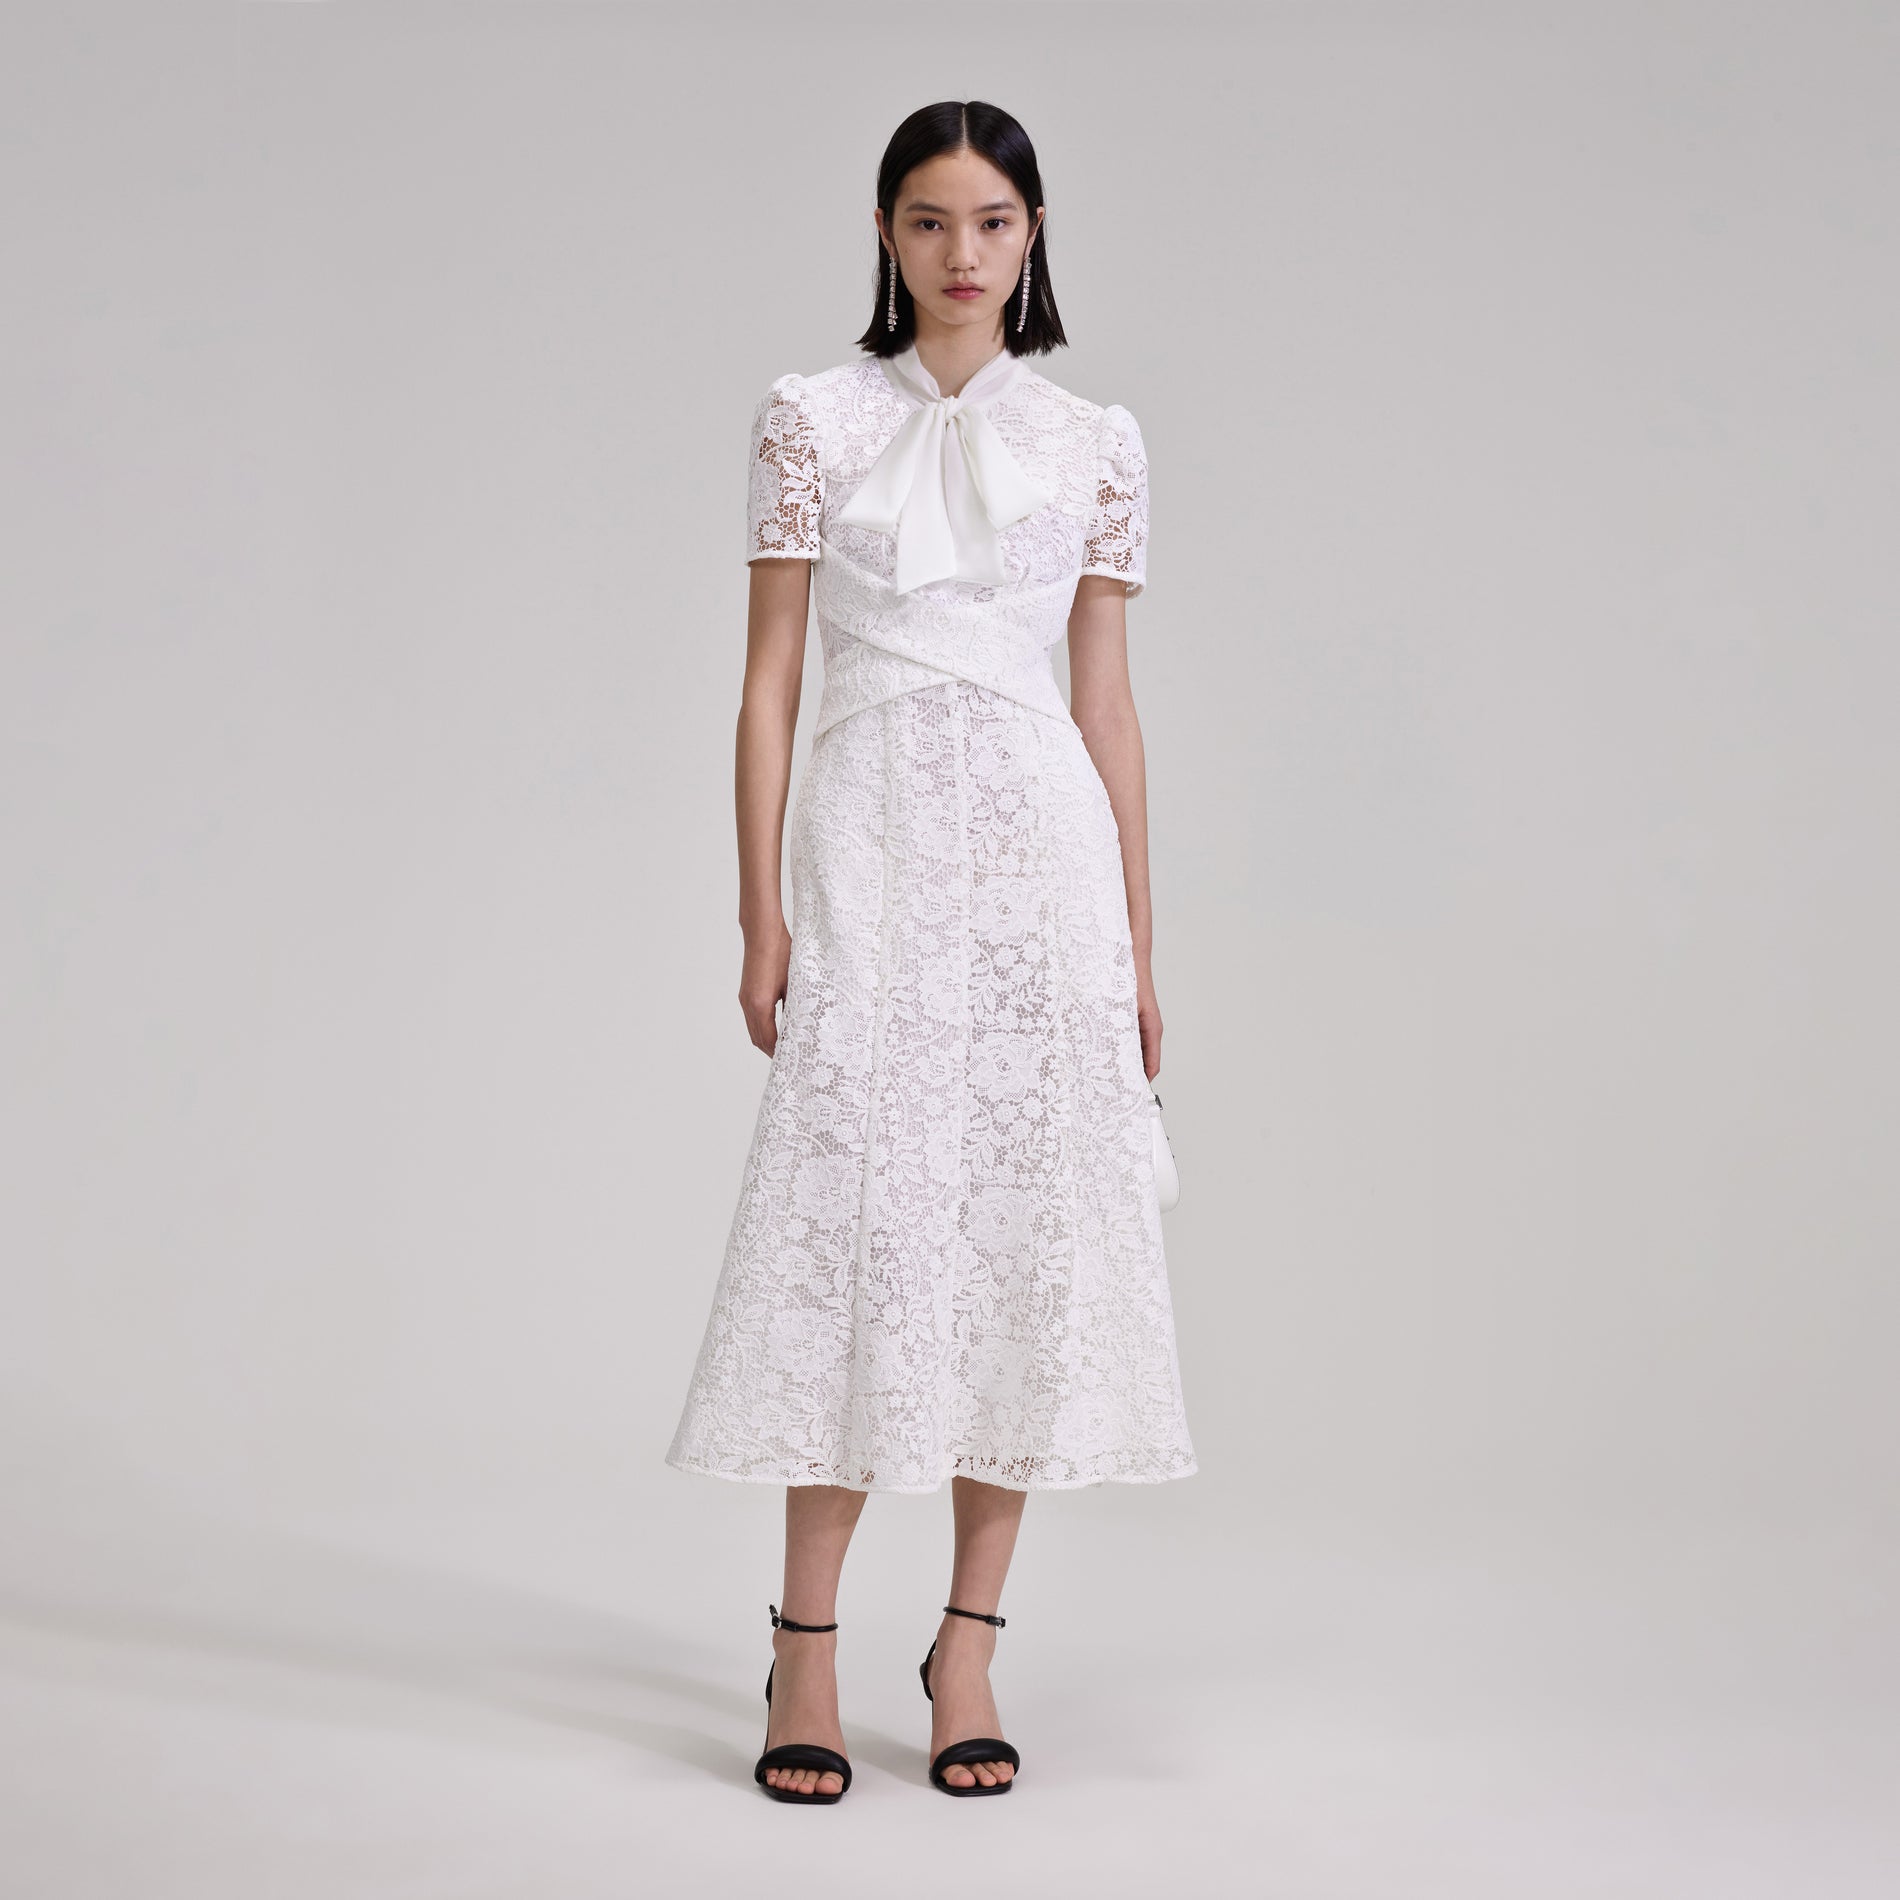 A woman wearing the White Cord Lace Crossover Midi Dress